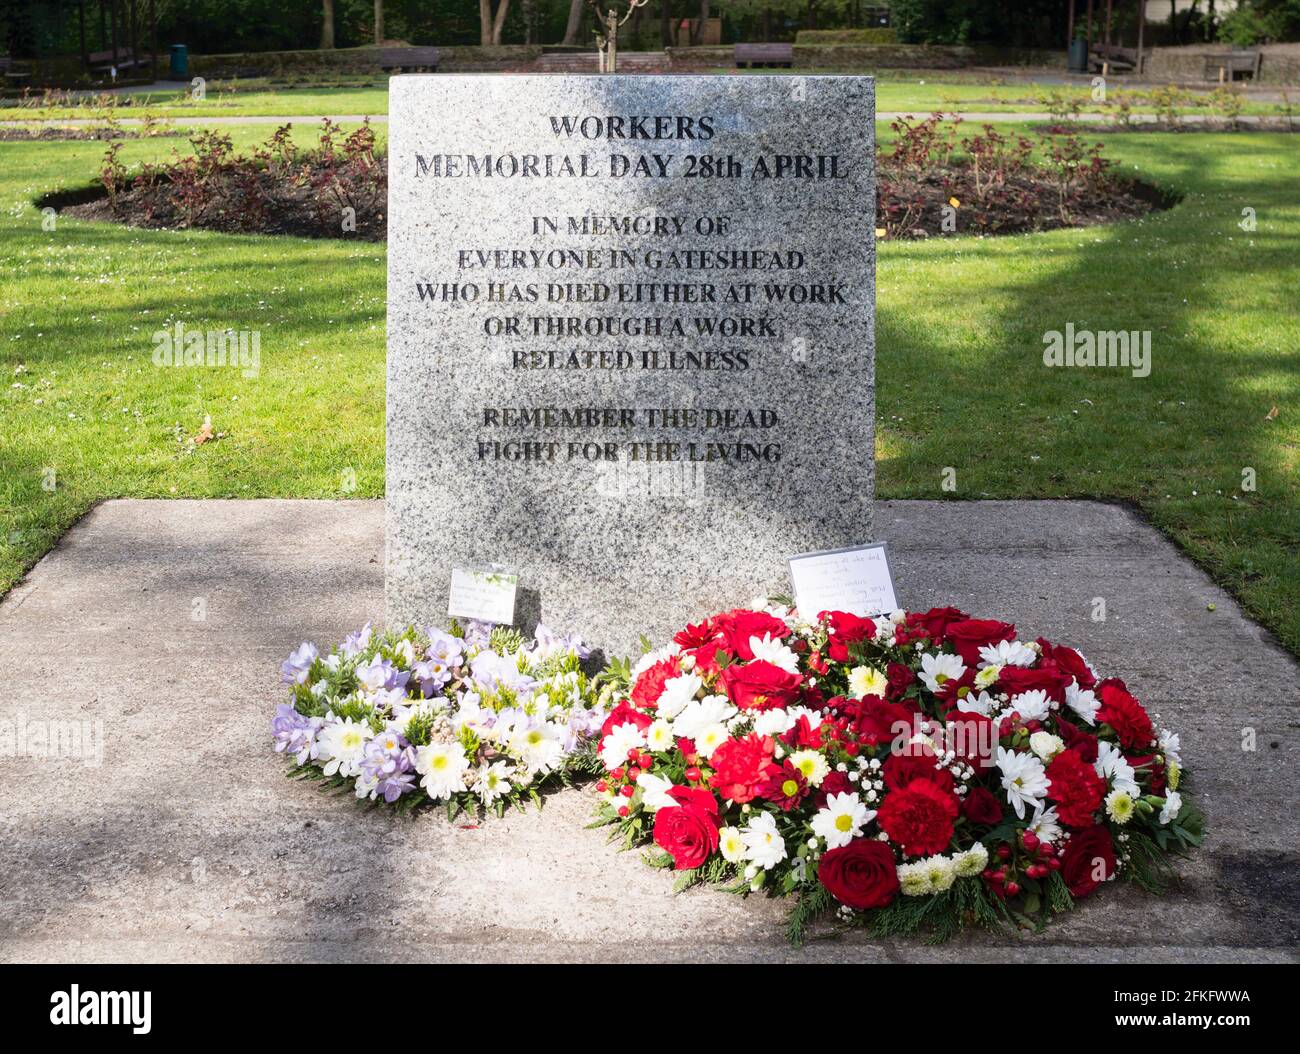 Workers memorial stone 28th April in Saltwell Park, Gateshead, north east England, UK Stock Photo